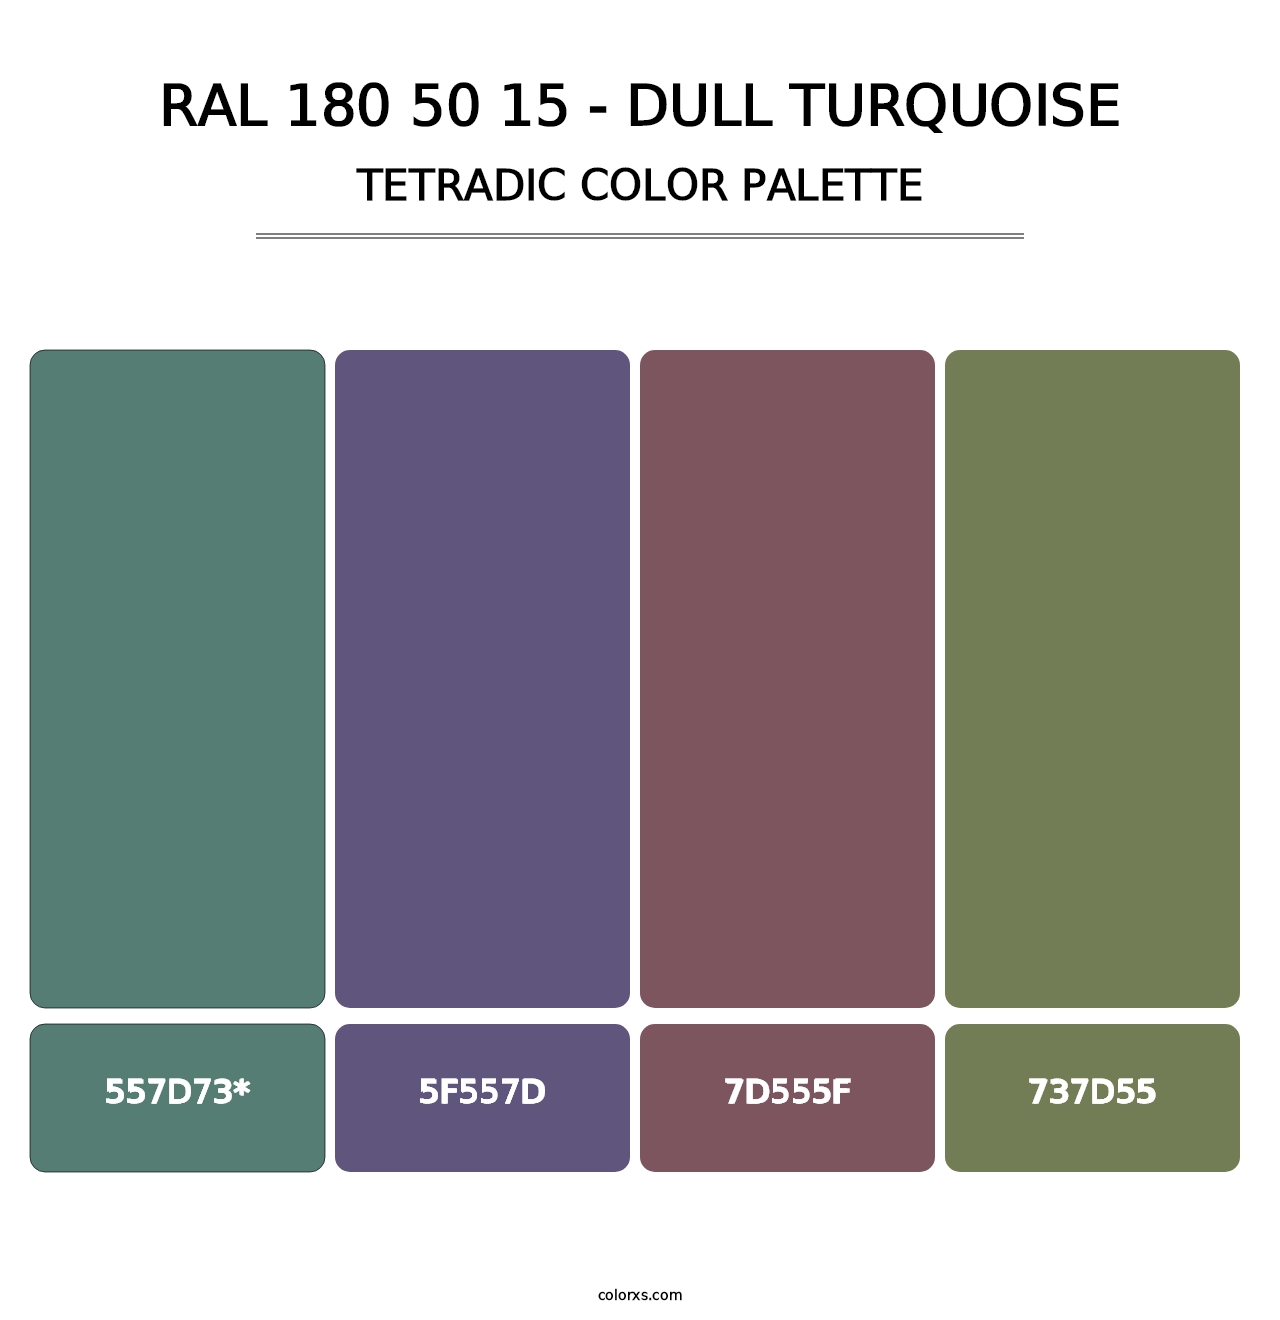 RAL 180 50 15 - Dull Turquoise - Tetradic Color Palette